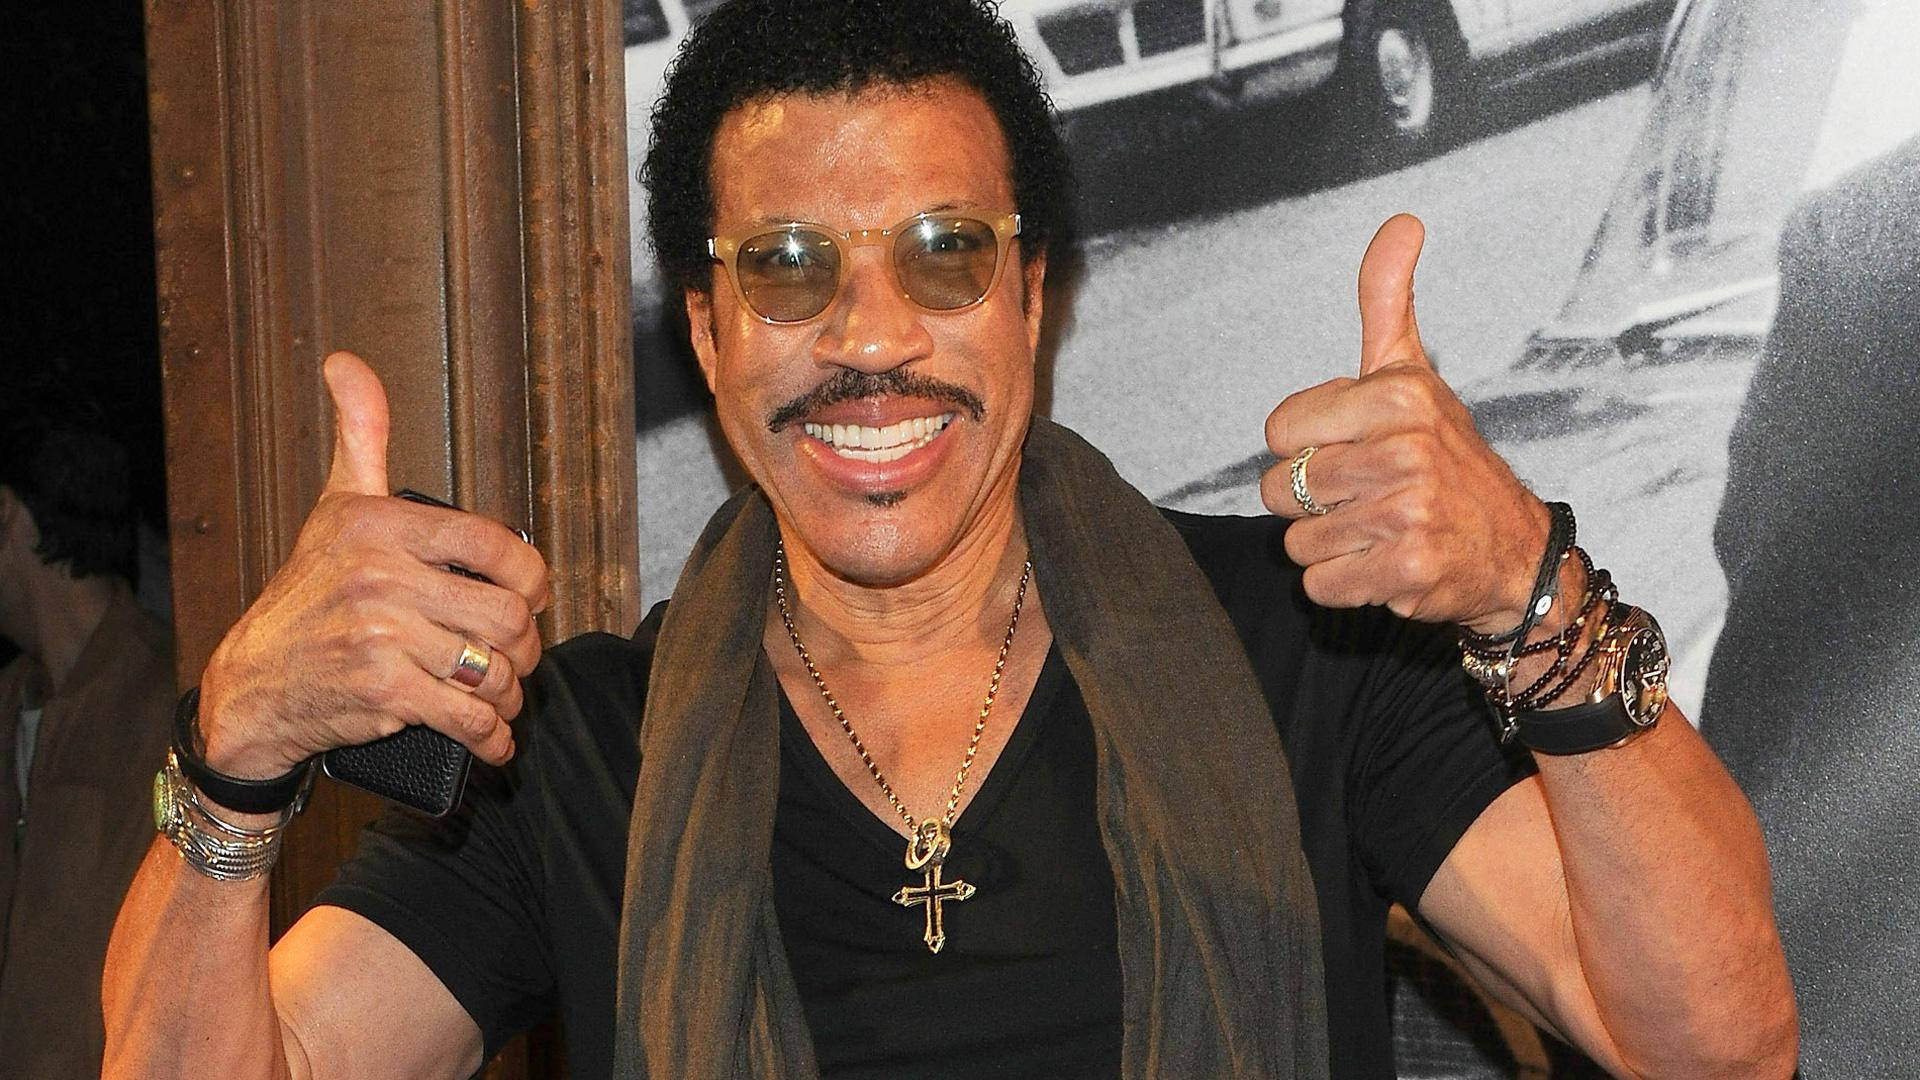 Lionel Richie Record Producer And Celebrity Wallpaper